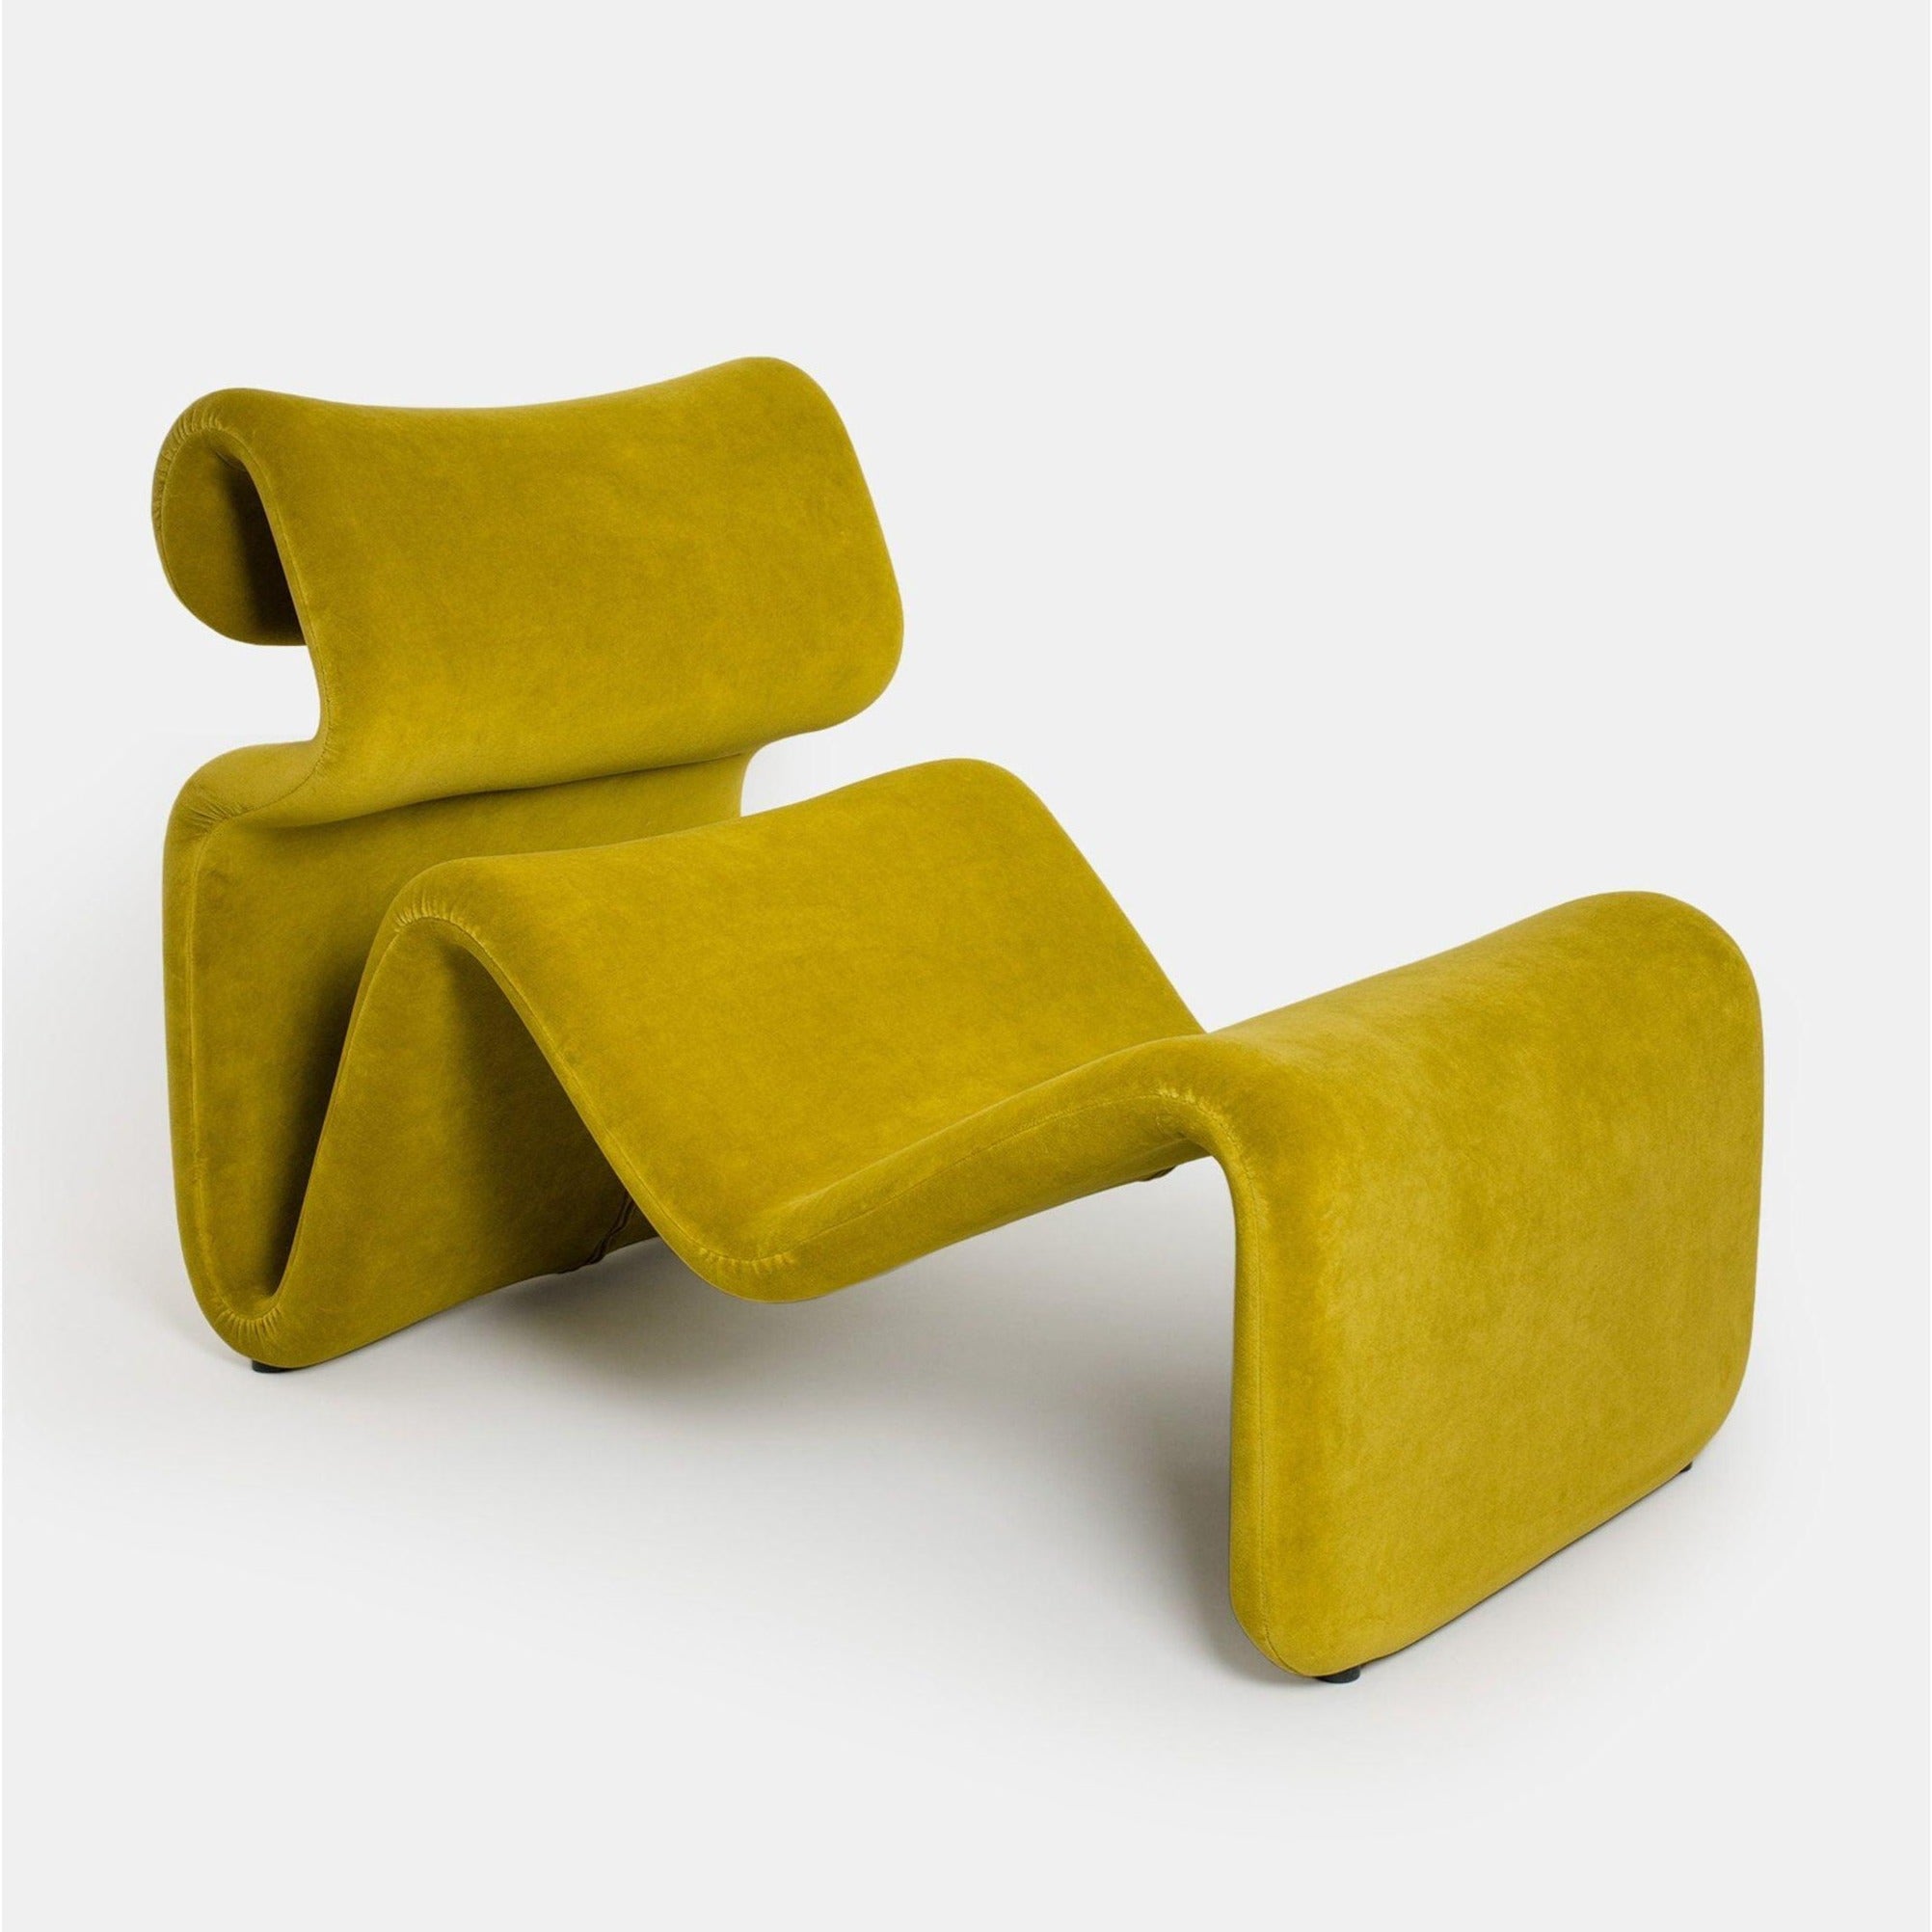 Etcetera Lounge Chair Chair Interior Moderna Chair Only Turmeric Yellow 